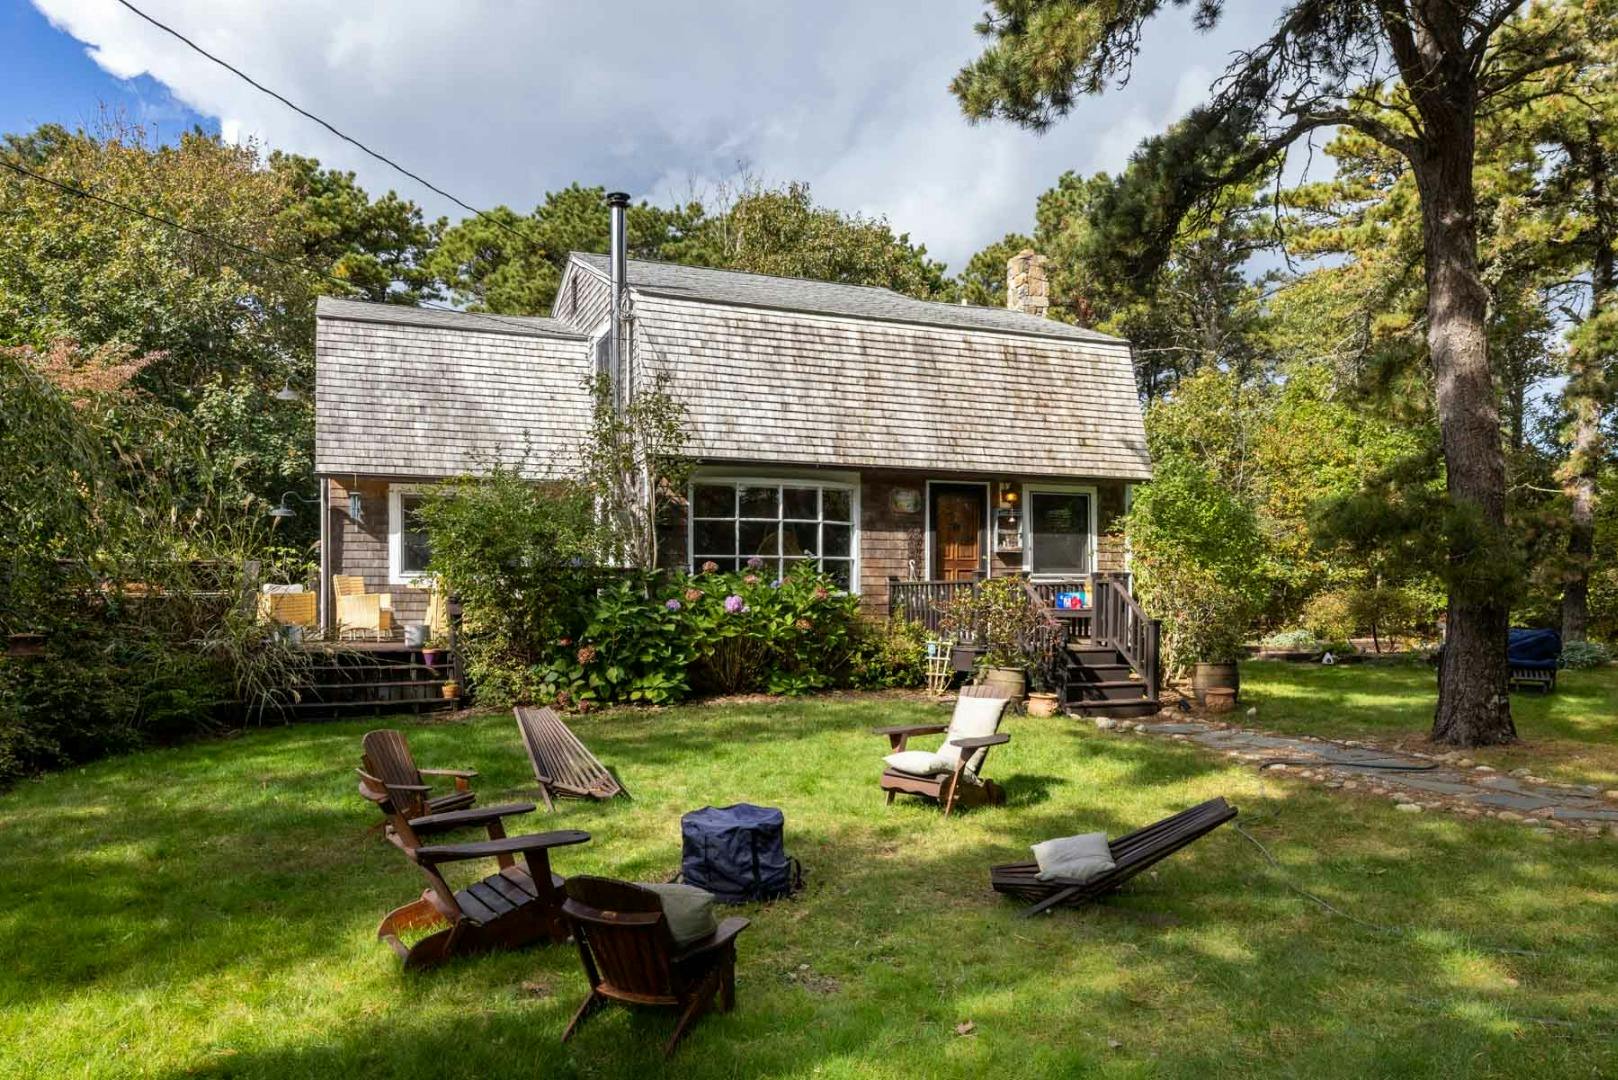 41-road-to-the-plains-edgartown-ma-02539-36495